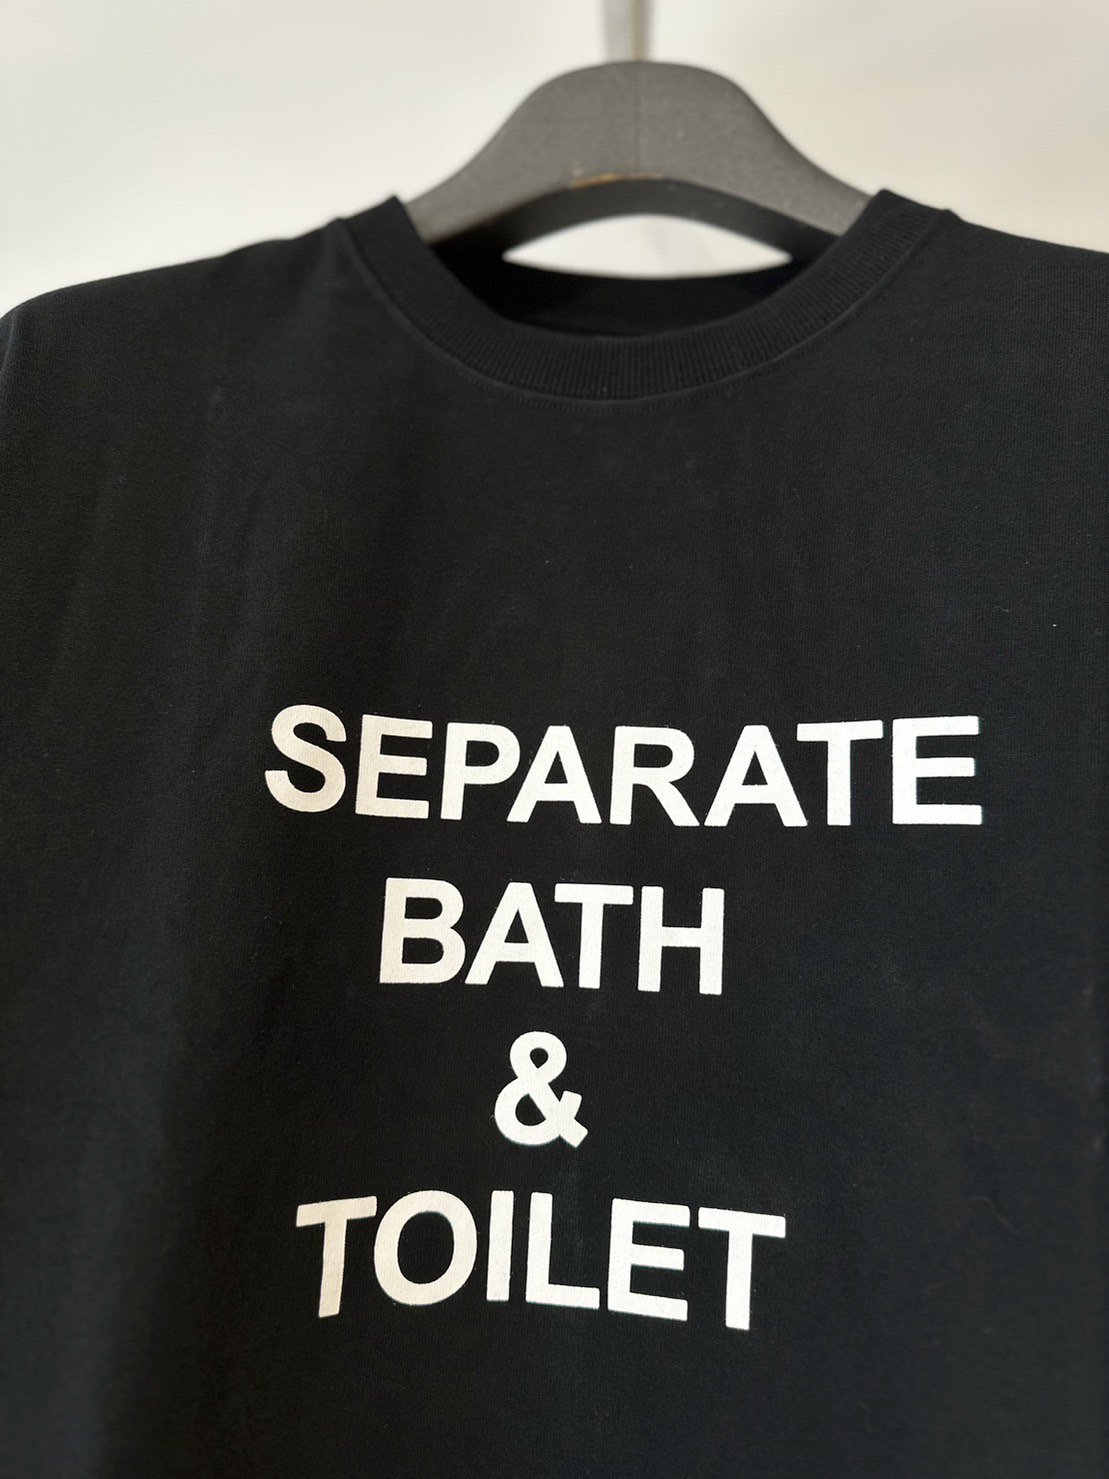 SEPARATE BATH & TOILET<br />LS TEE / BLACK<img class='new_mark_img2' src='https://img.shop-pro.jp/img/new/icons14.gif' style='border:none;display:inline;margin:0px;padding:0px;width:auto;' />